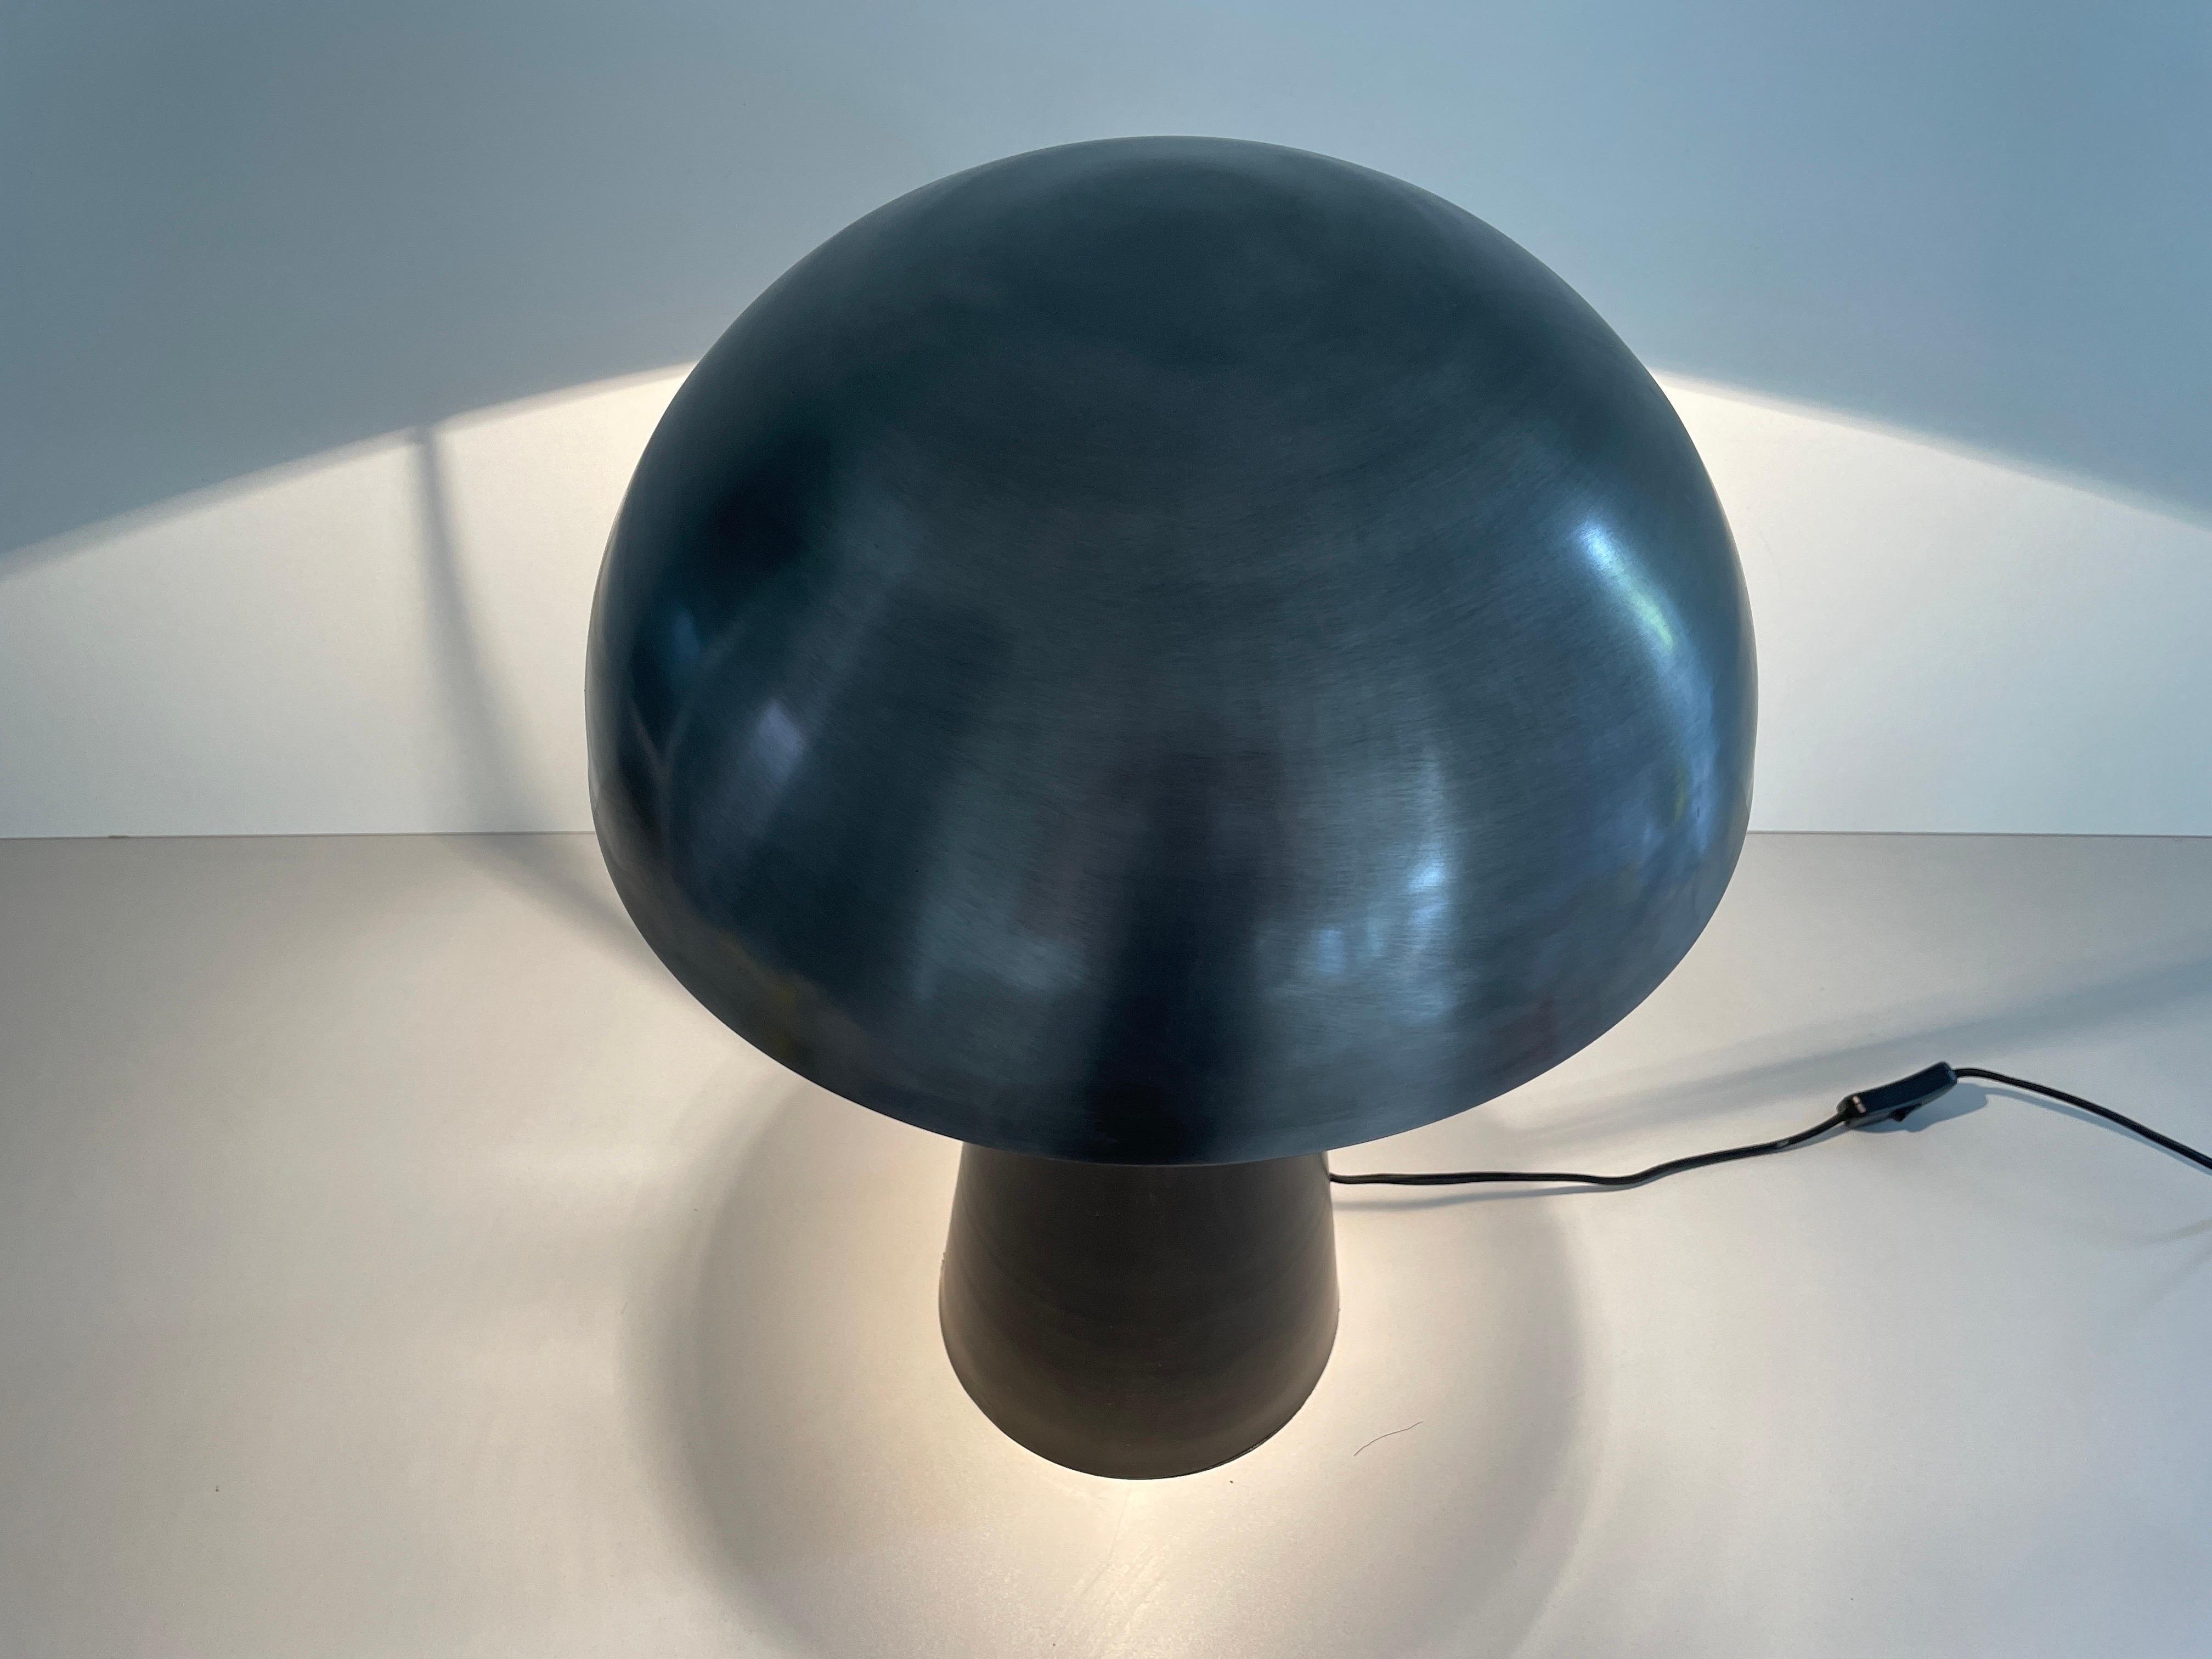 Muschroom and Conic Design Large Table Lamp by LAMBERT, 1980s, Germany For Sale 8